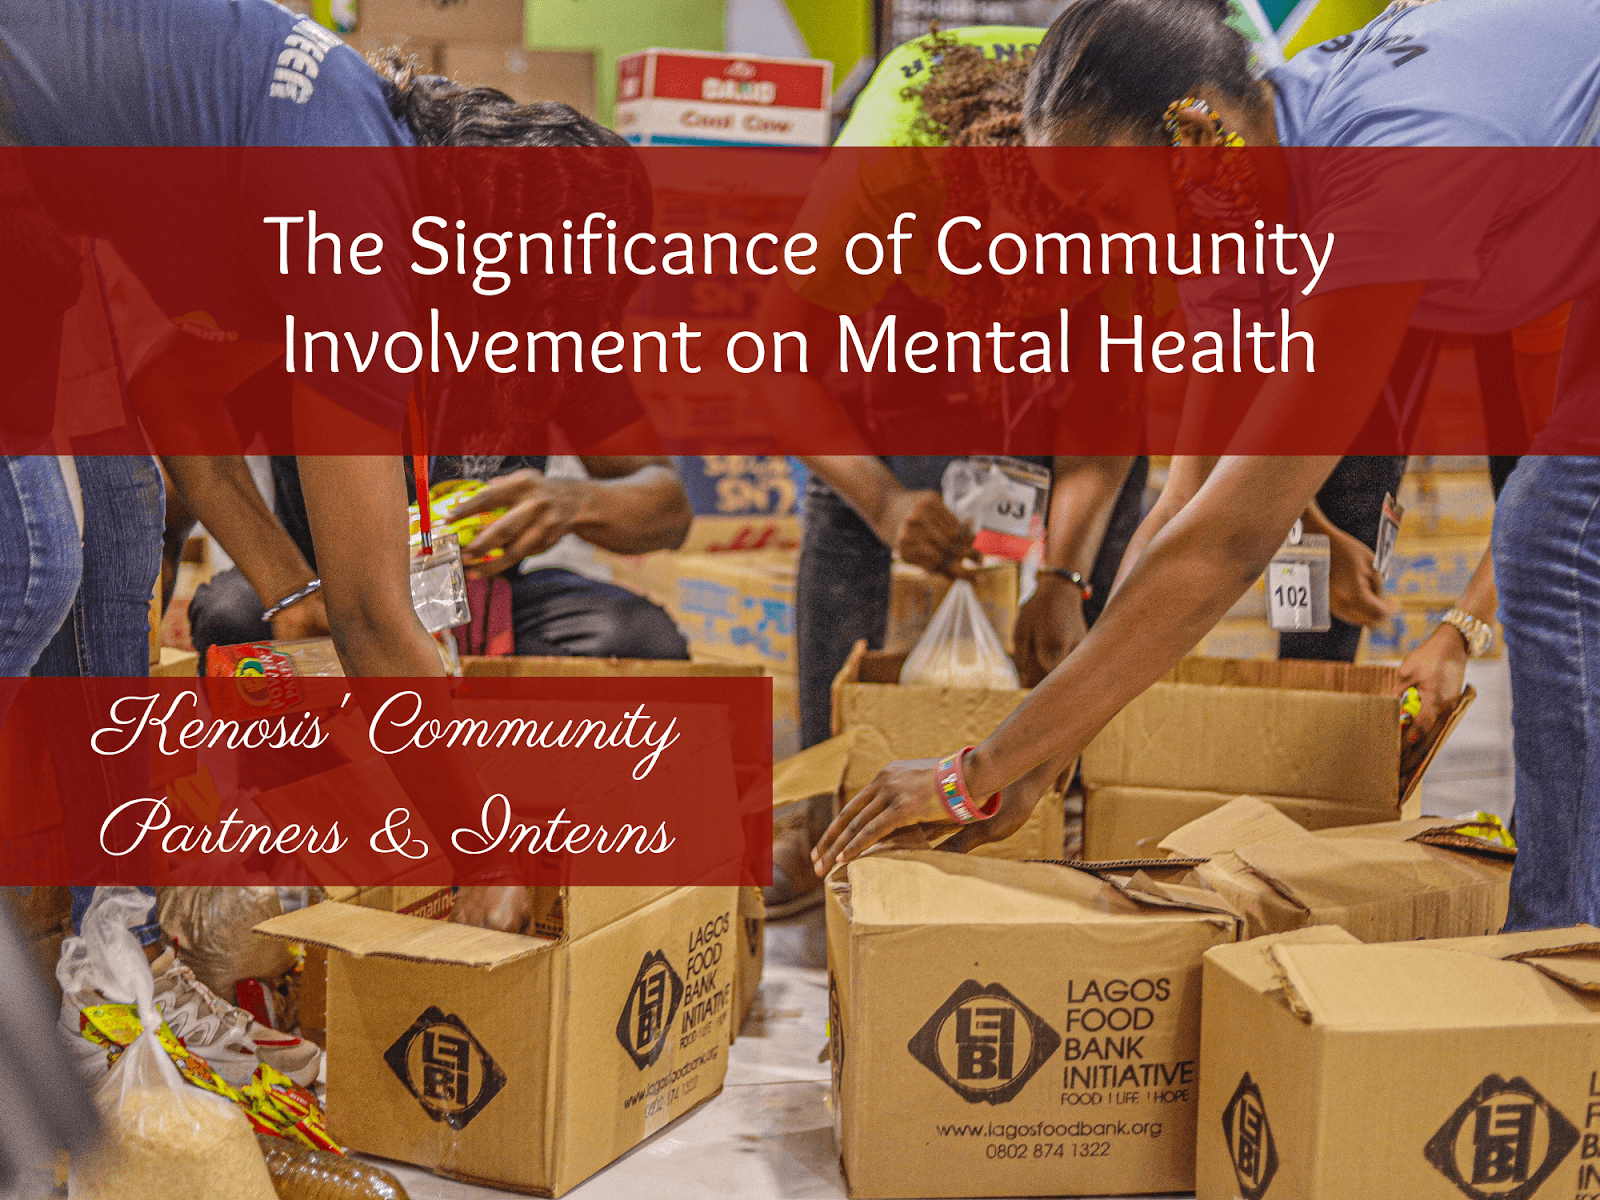 The Significance of Community Involvement on Mental Health